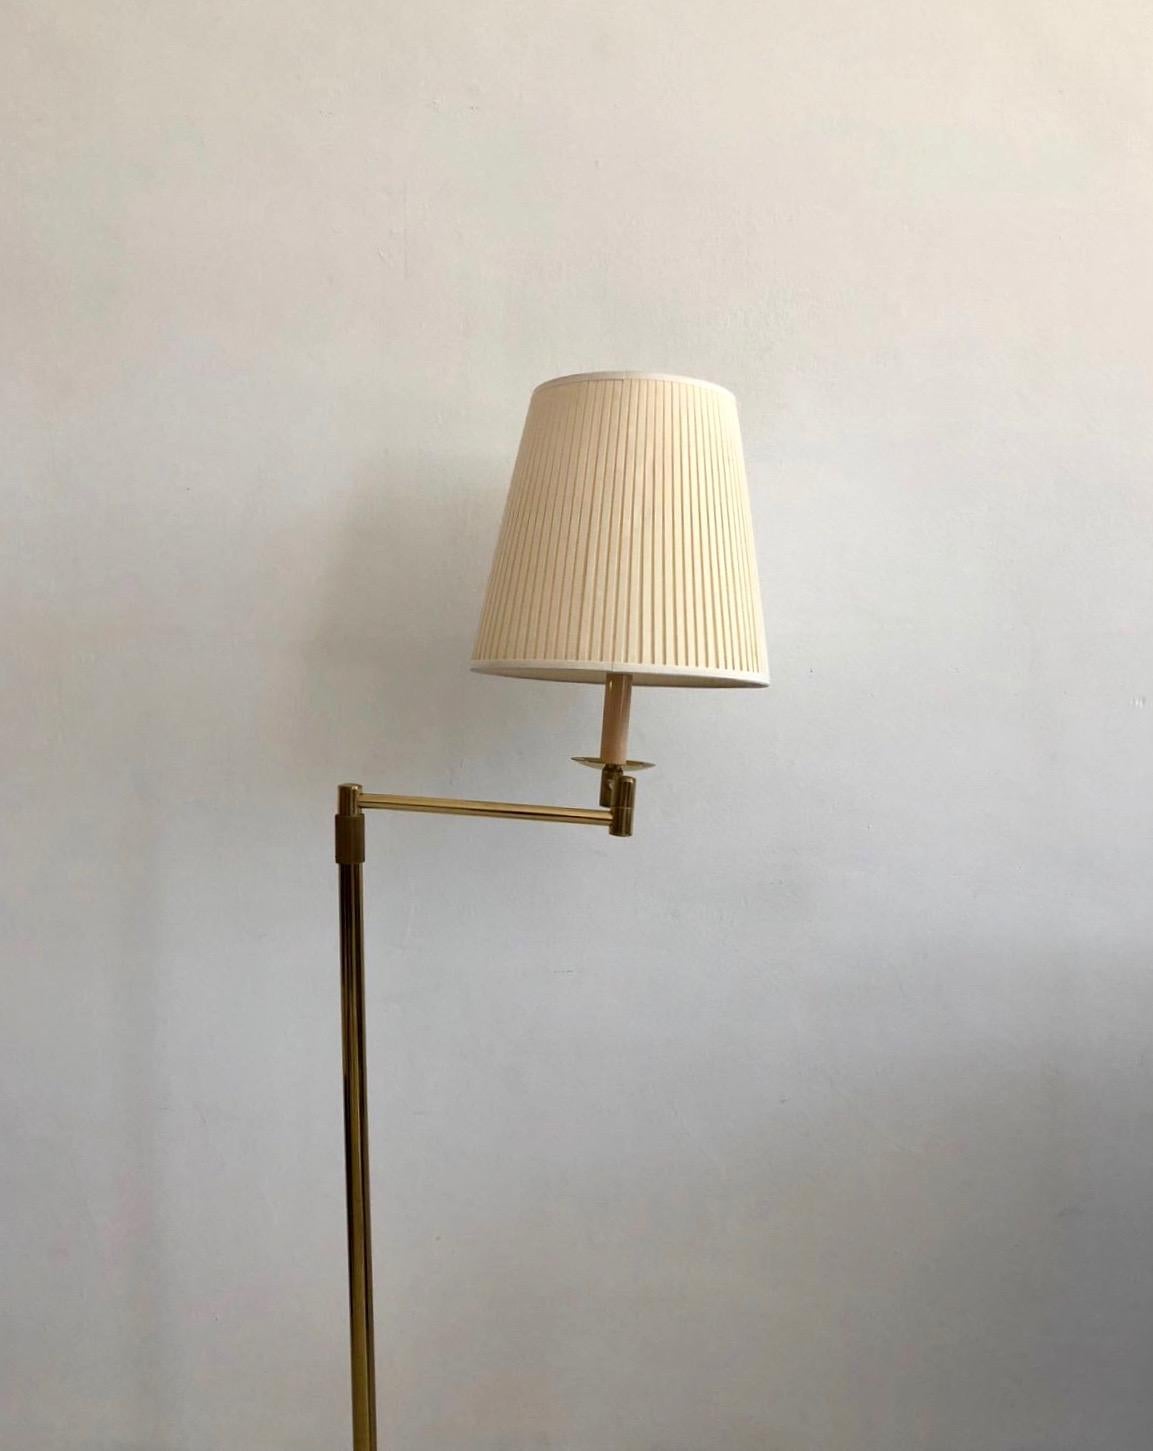 Mid-Century Modern Brass Floor Lamp with Adjustable Arm and Cream Color Shade